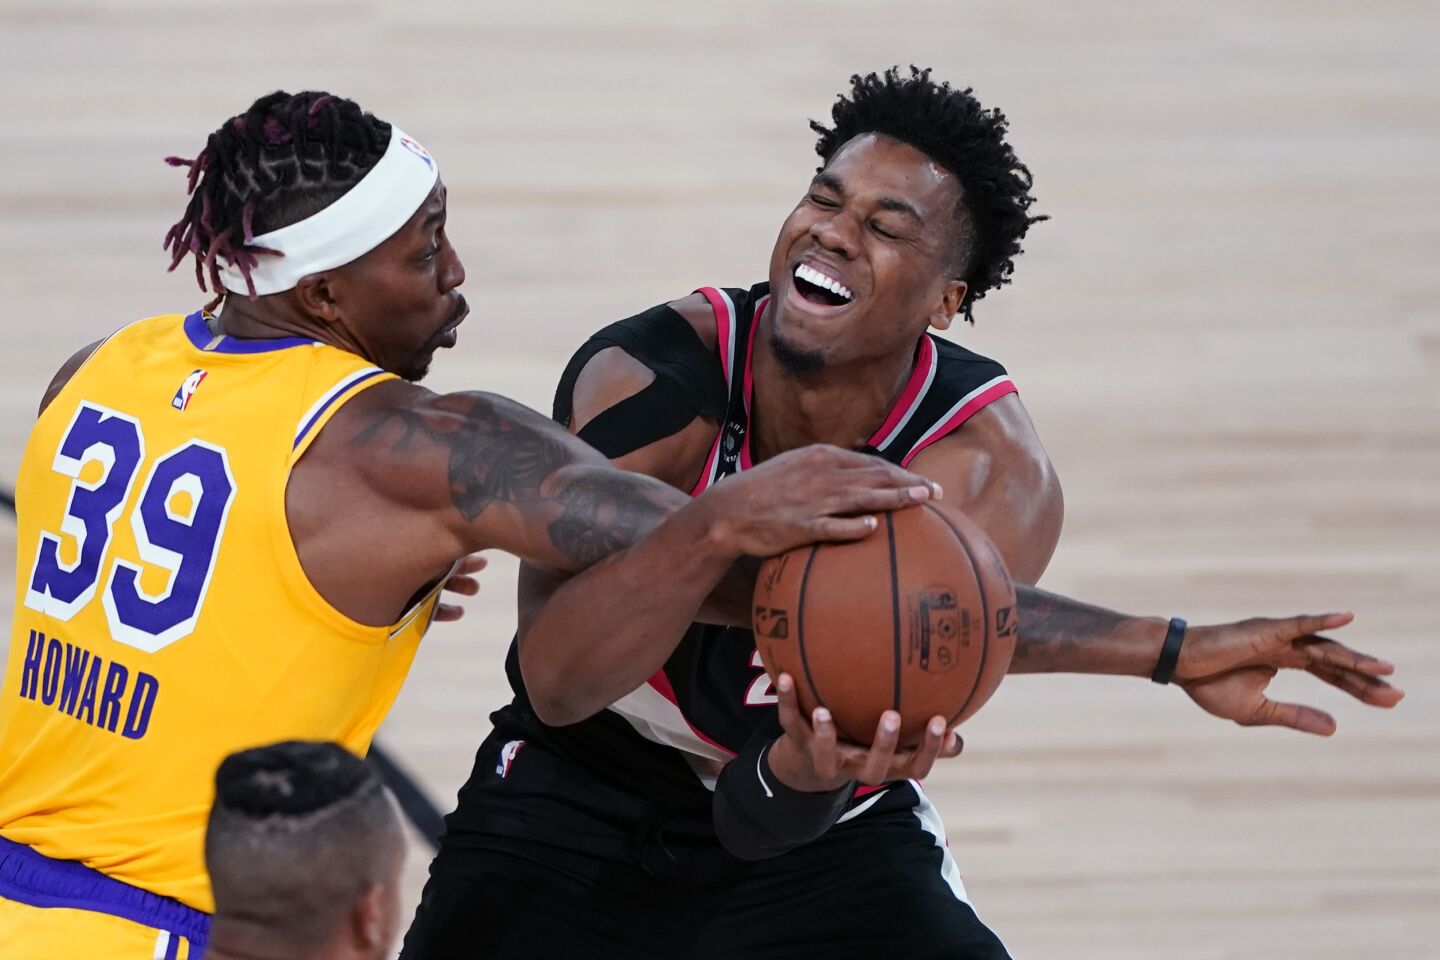 Lakers center Dwight Howard, left, battles with Portland Trail Blazers center Hassan Whiteside during the second half.